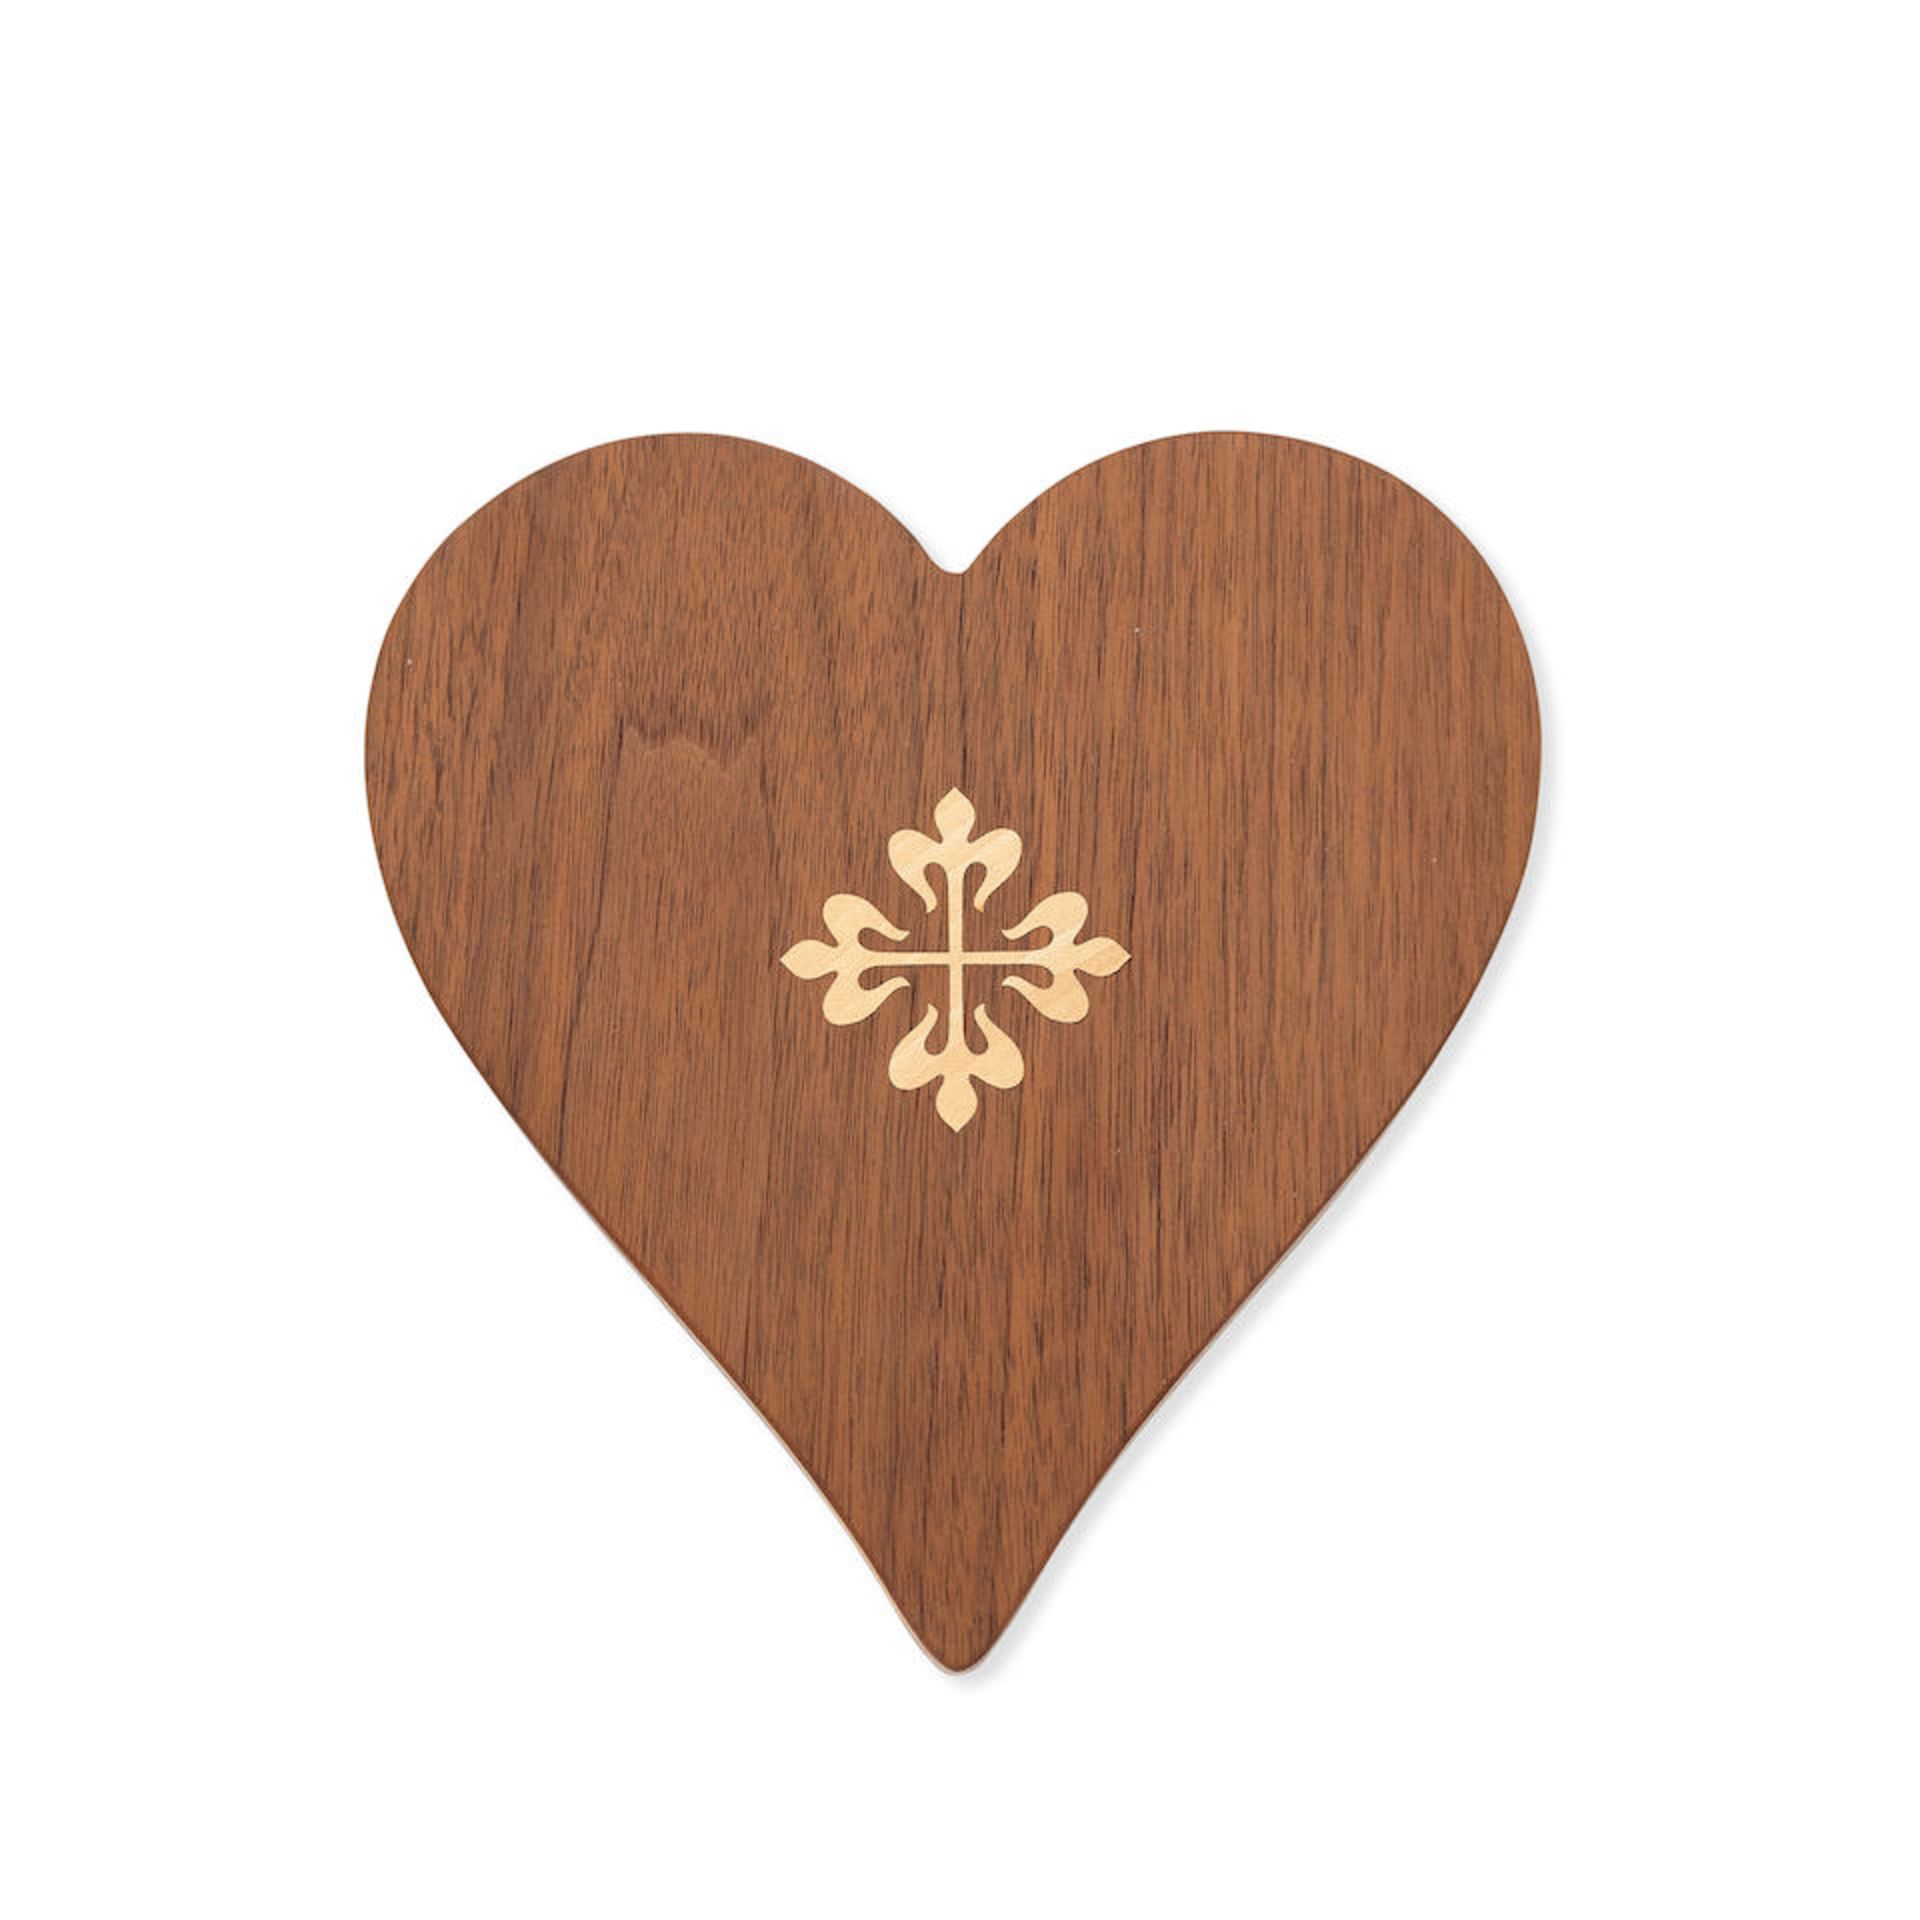 Patek Philippe. A wooden heart shaped chocolate box Circa 2010 - Image 4 of 5